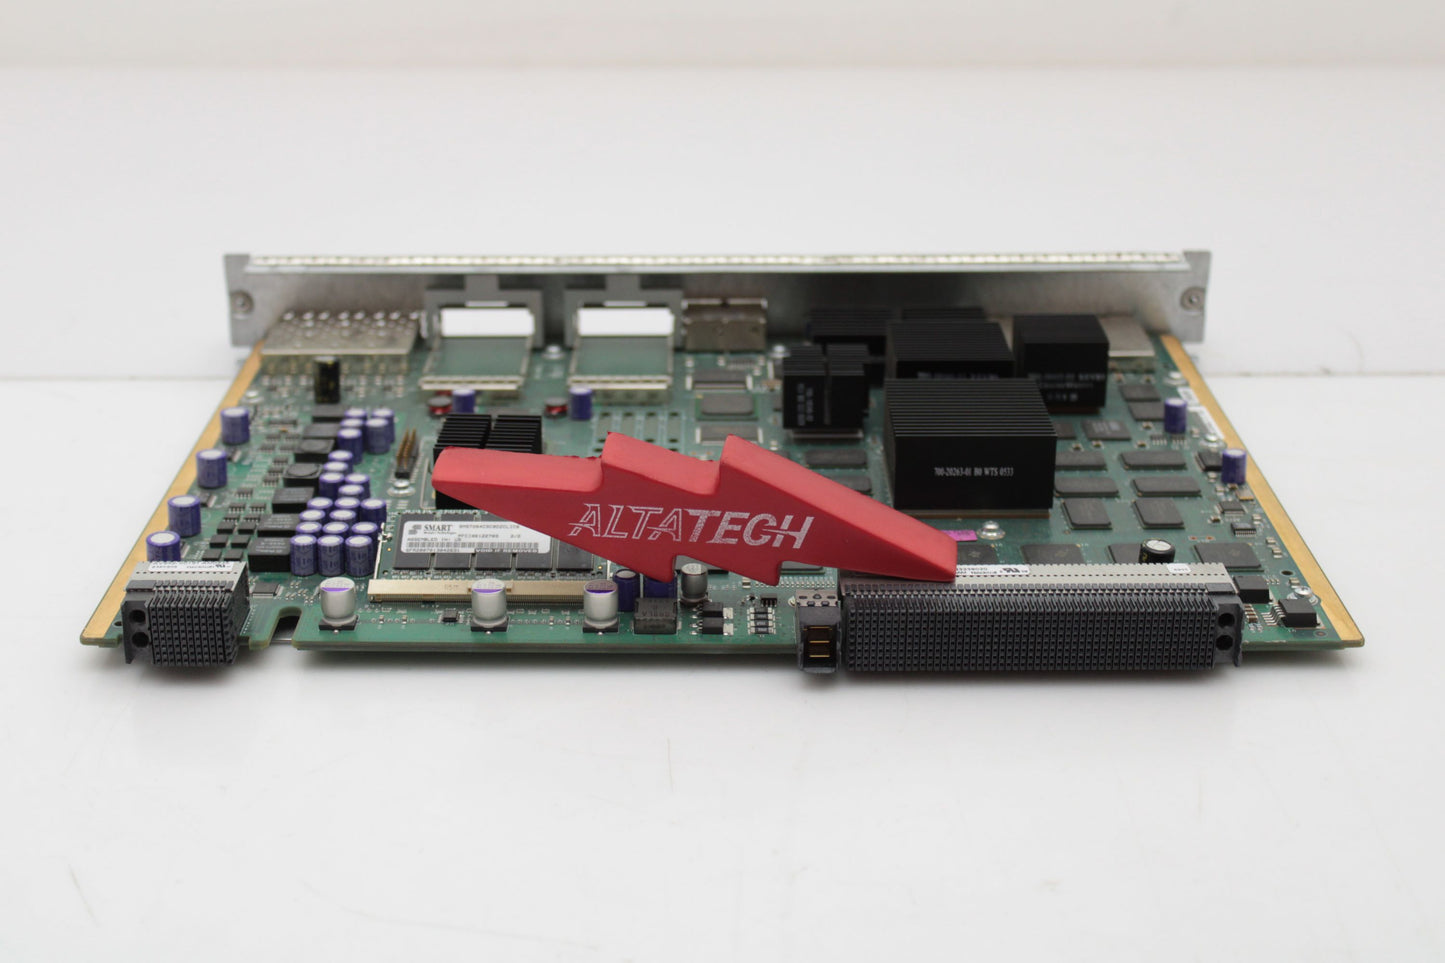 Cisco WS-X4516-10GE WS-X4516-10GE Catalyst 4500 Supervisor Engine V-10GE, 2x10GE (X2) and 4x1GE (SFP), Used